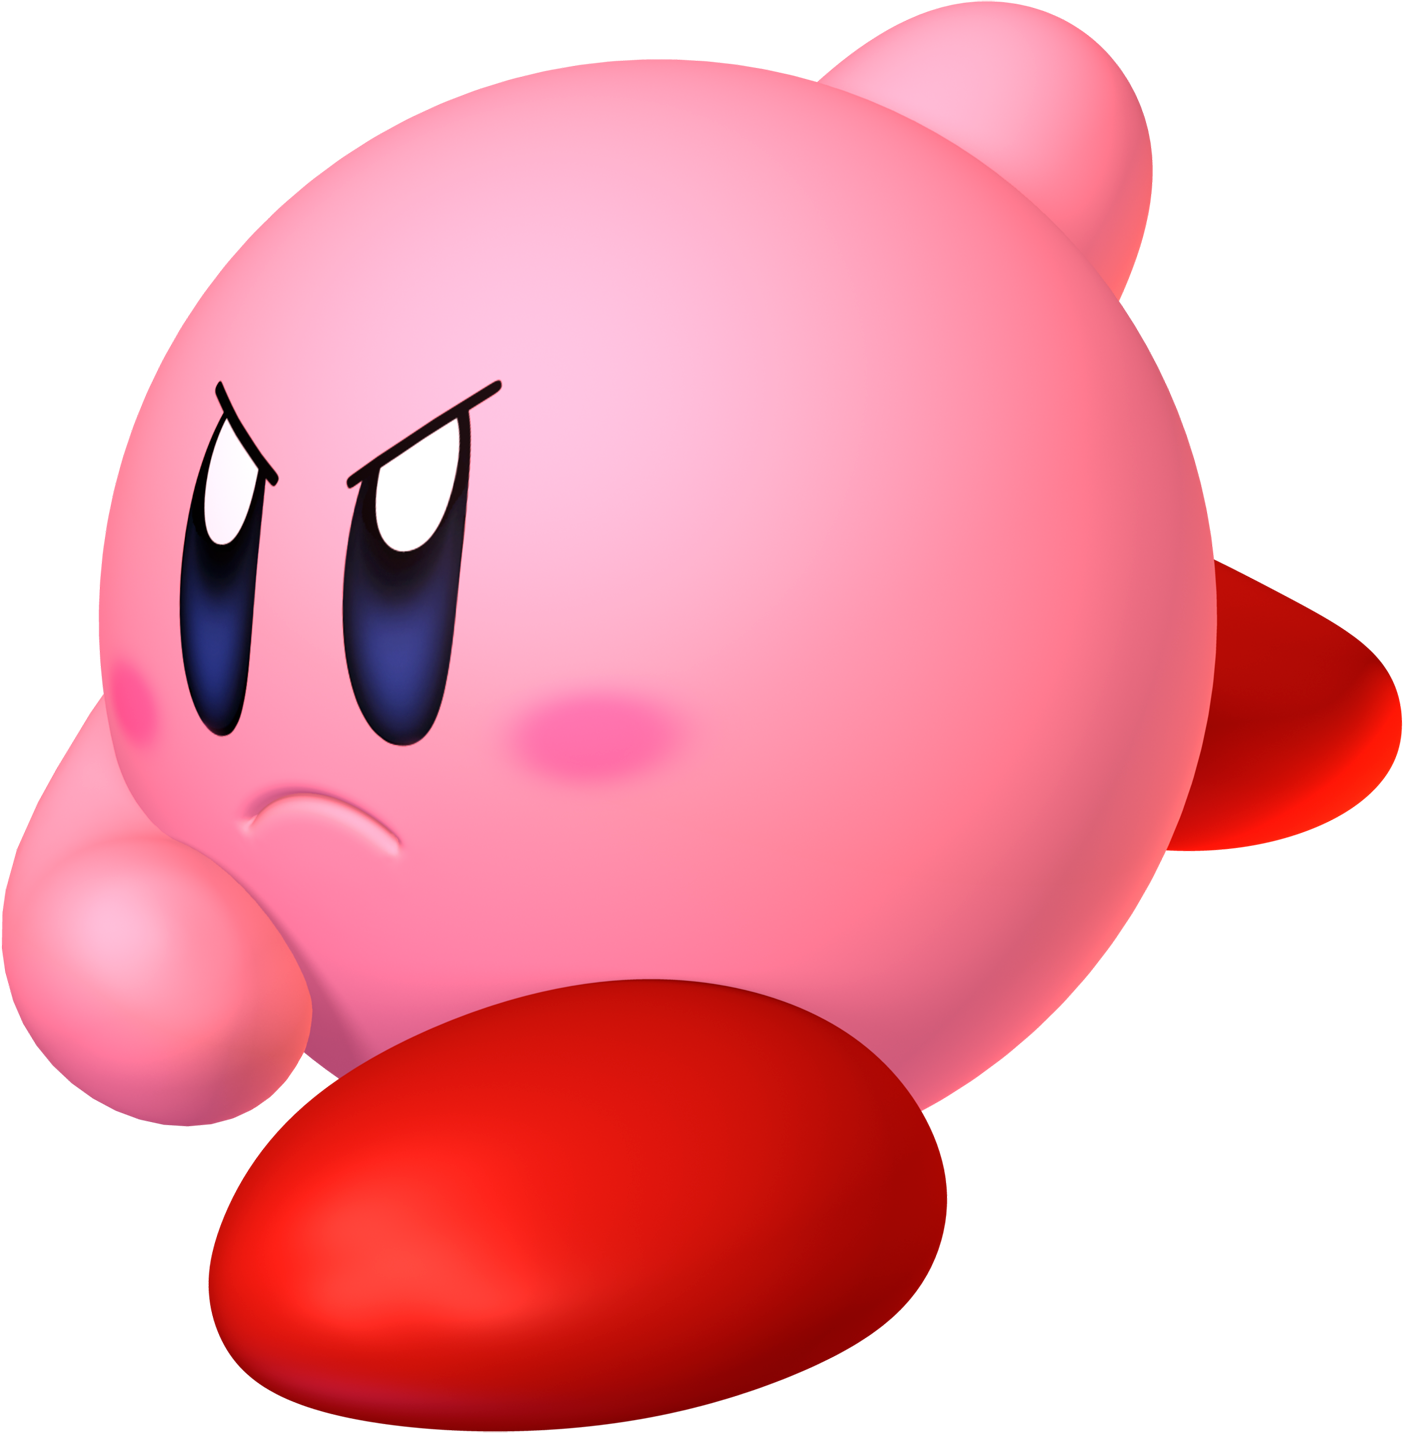 Kirby Png Picture PNG Image